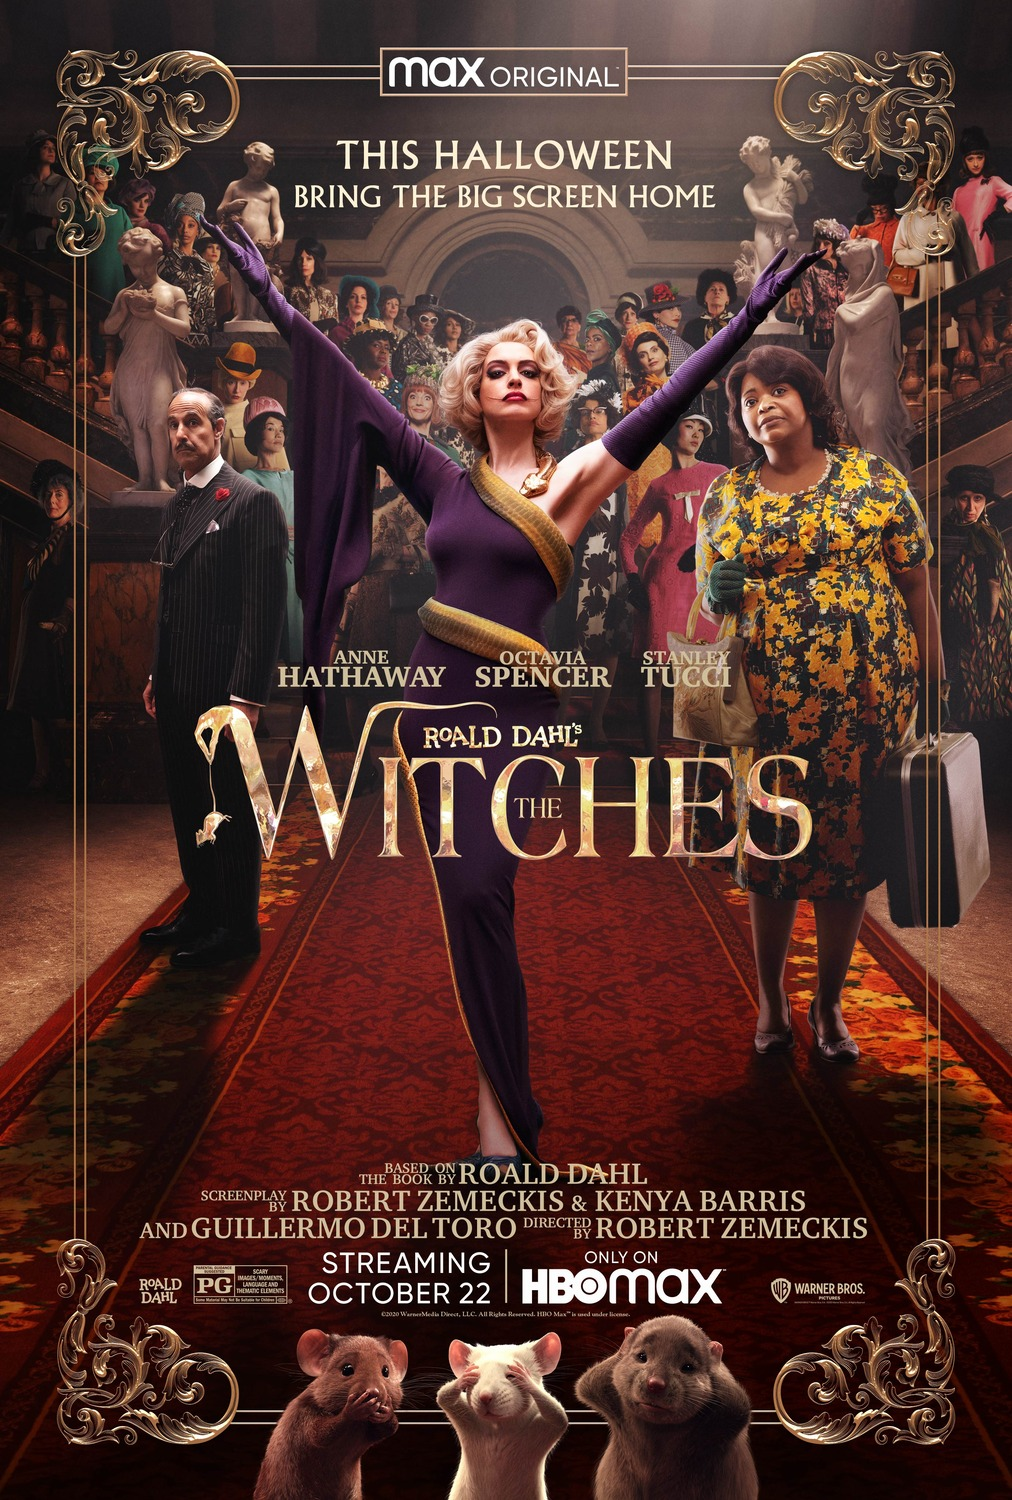 The Witches (2020 film) Warner Bros picture pic